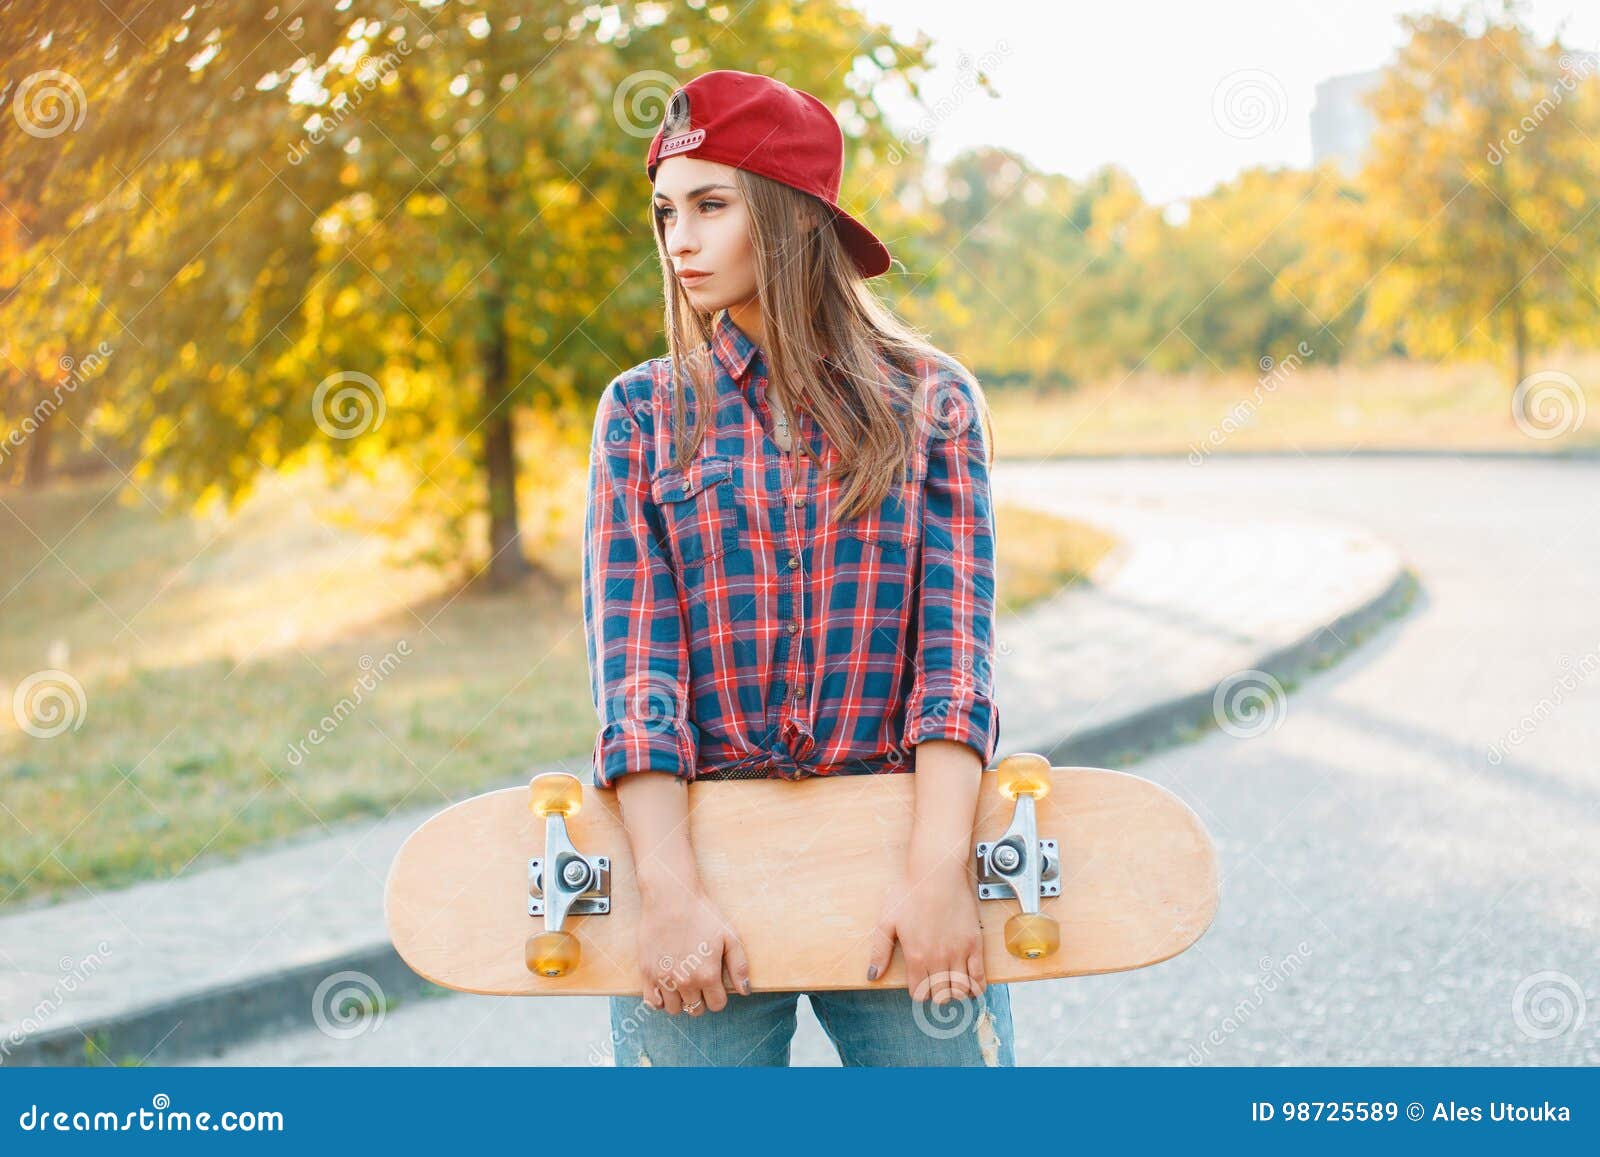 Beautiful and Fashion Young Woman Posing with a Skateboard Stock Image ...